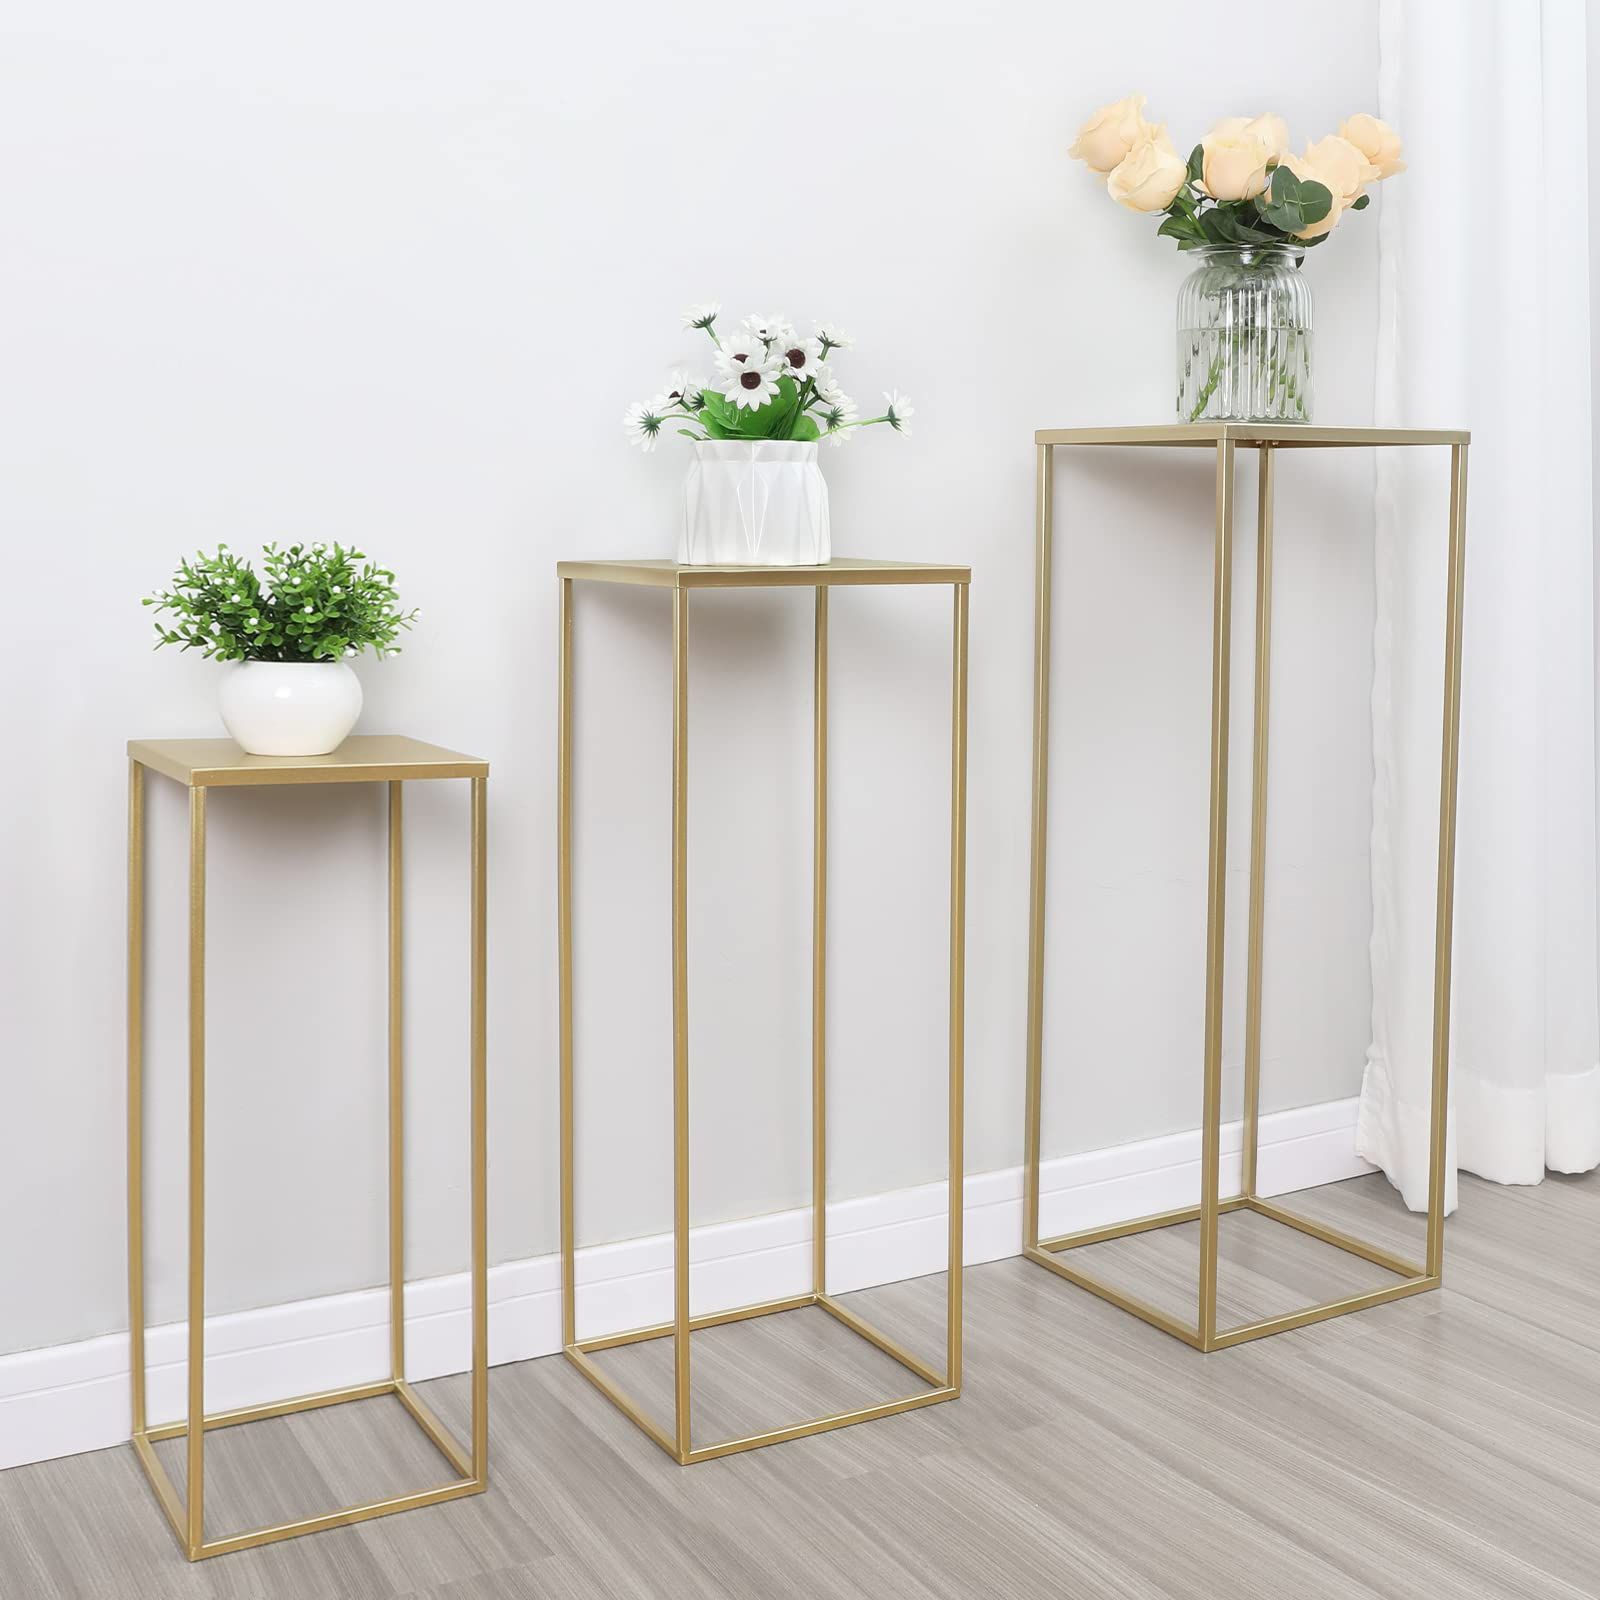 Current Plant Stands With Table Pertaining To Amazon : Set Of 3 Metal Plant Stand Golden Nesting Display End Table  Tall Pedestal Cylinder Rack, Indoor Outdoor Flower Holder Corner Planter  Pot Rack For Parties Home Decor, Patio Weddings Ceremony : (View 6 of 10)